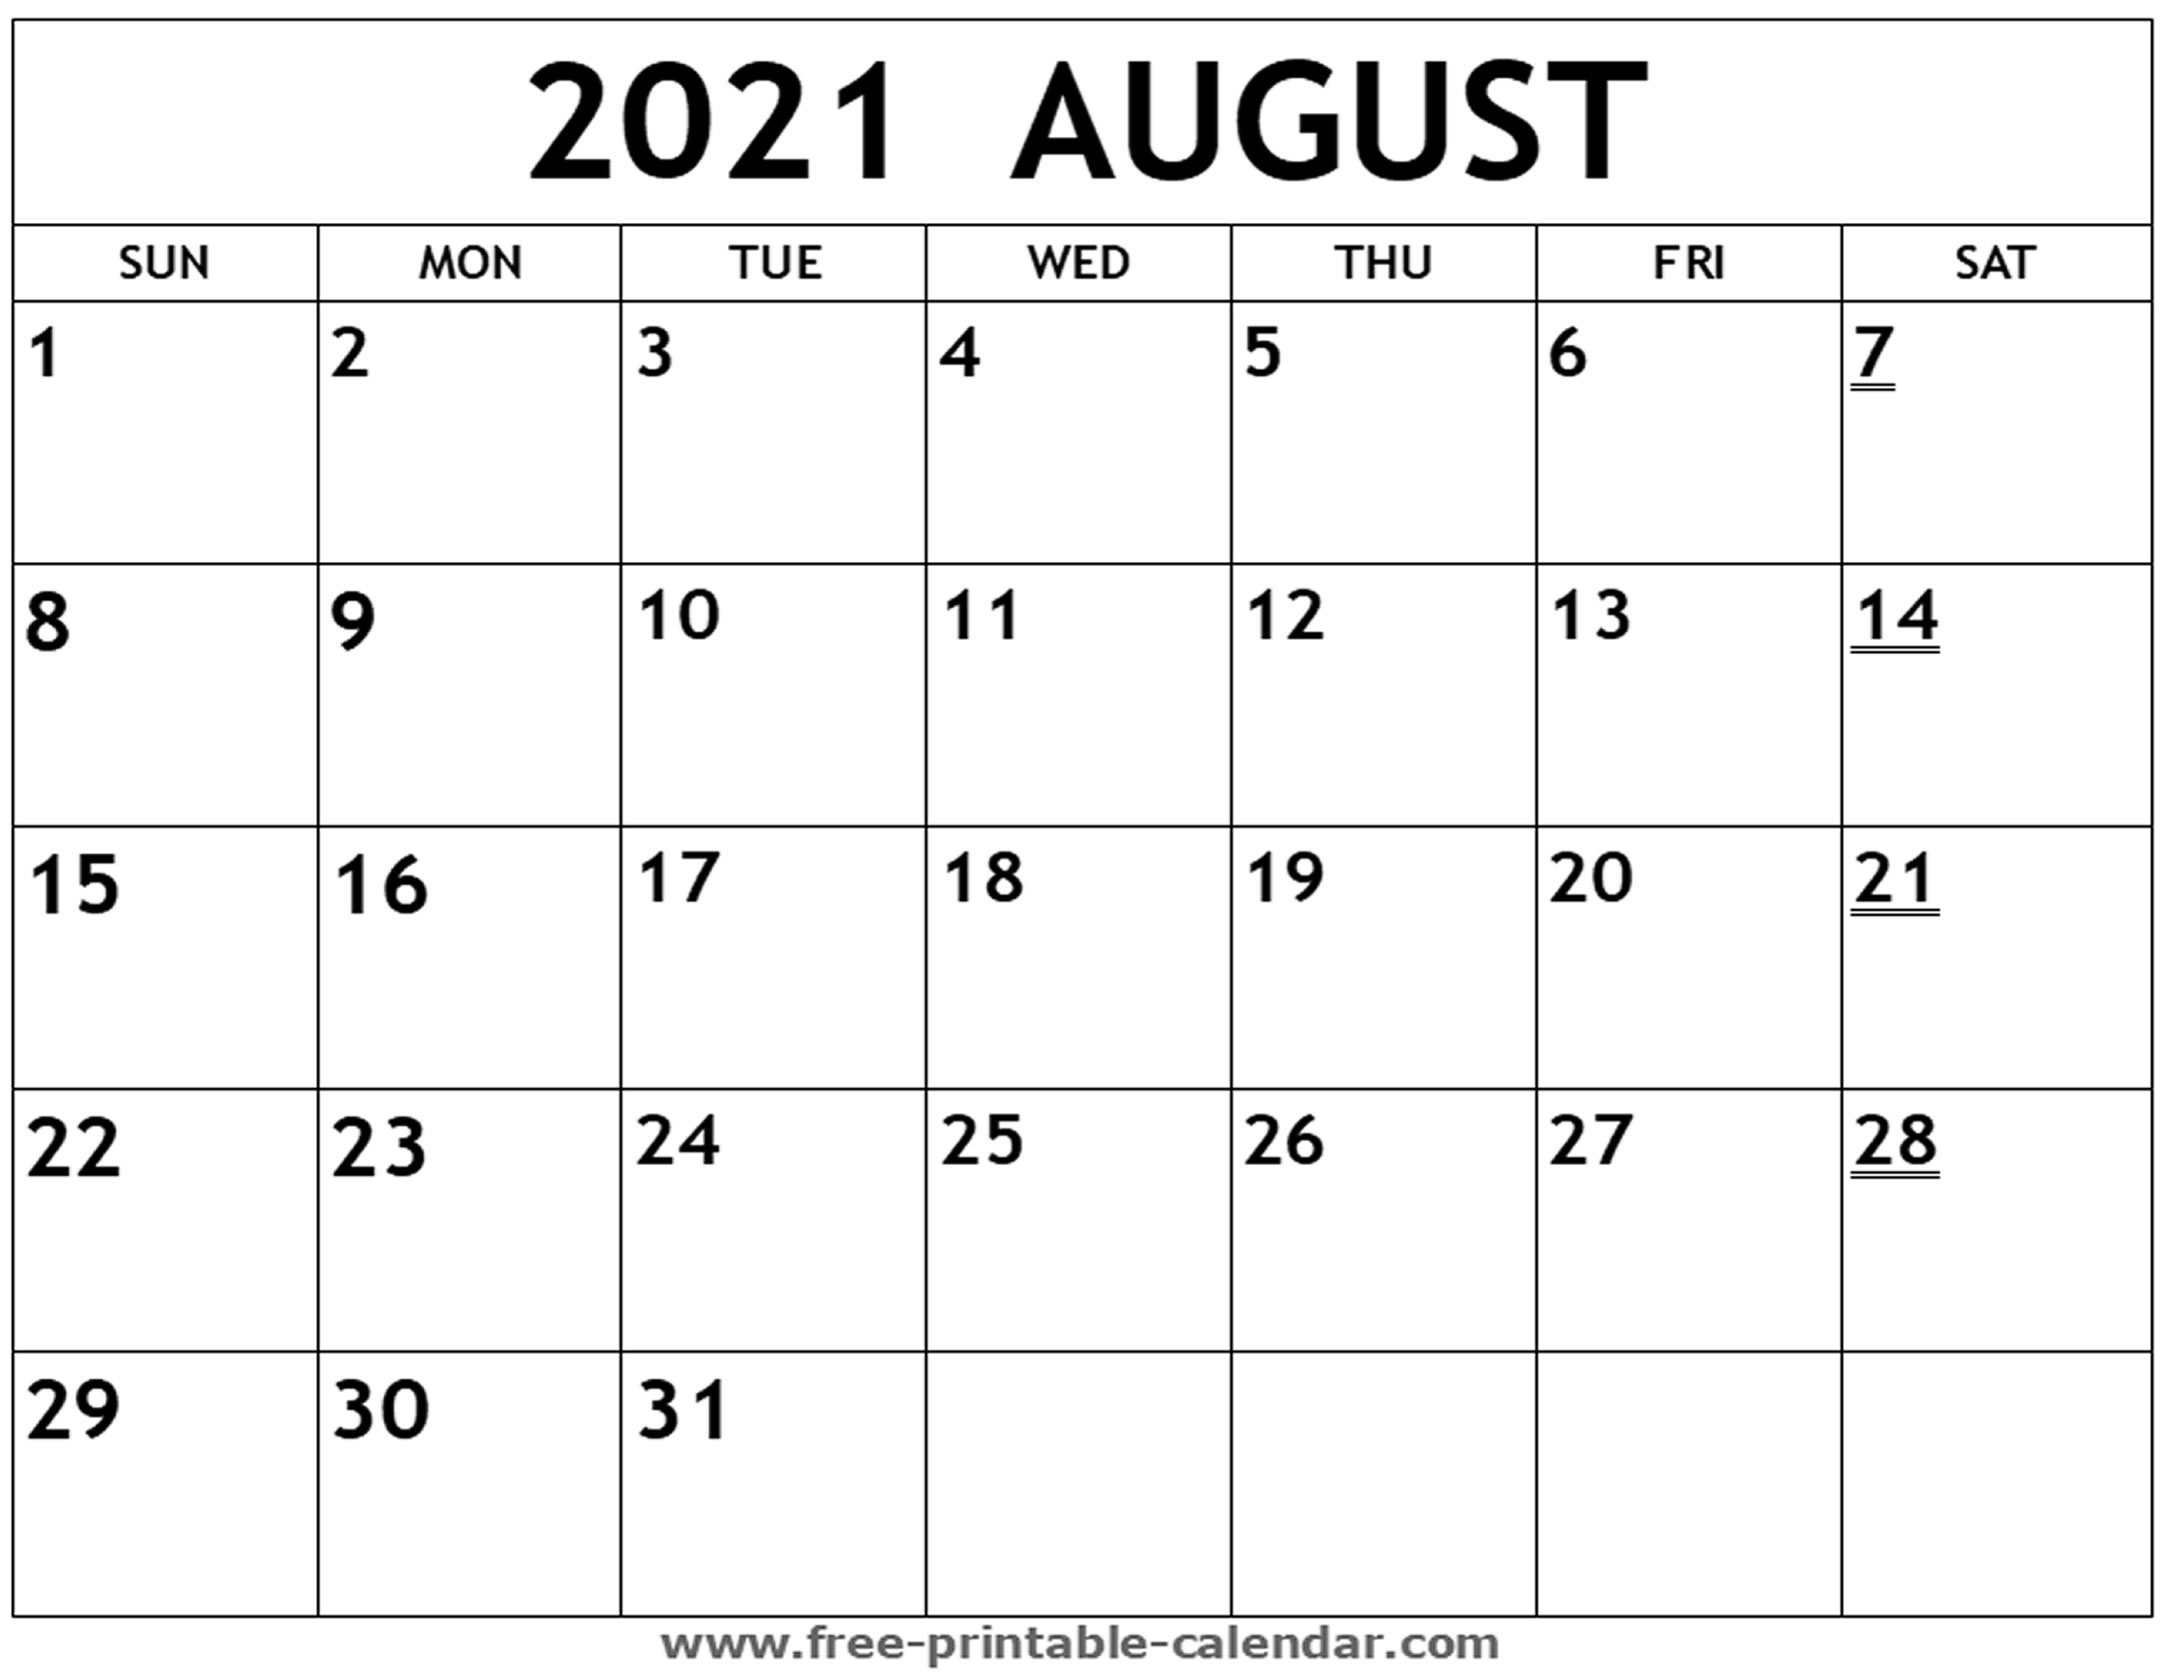 Collect 2021 August Calendar Print Out